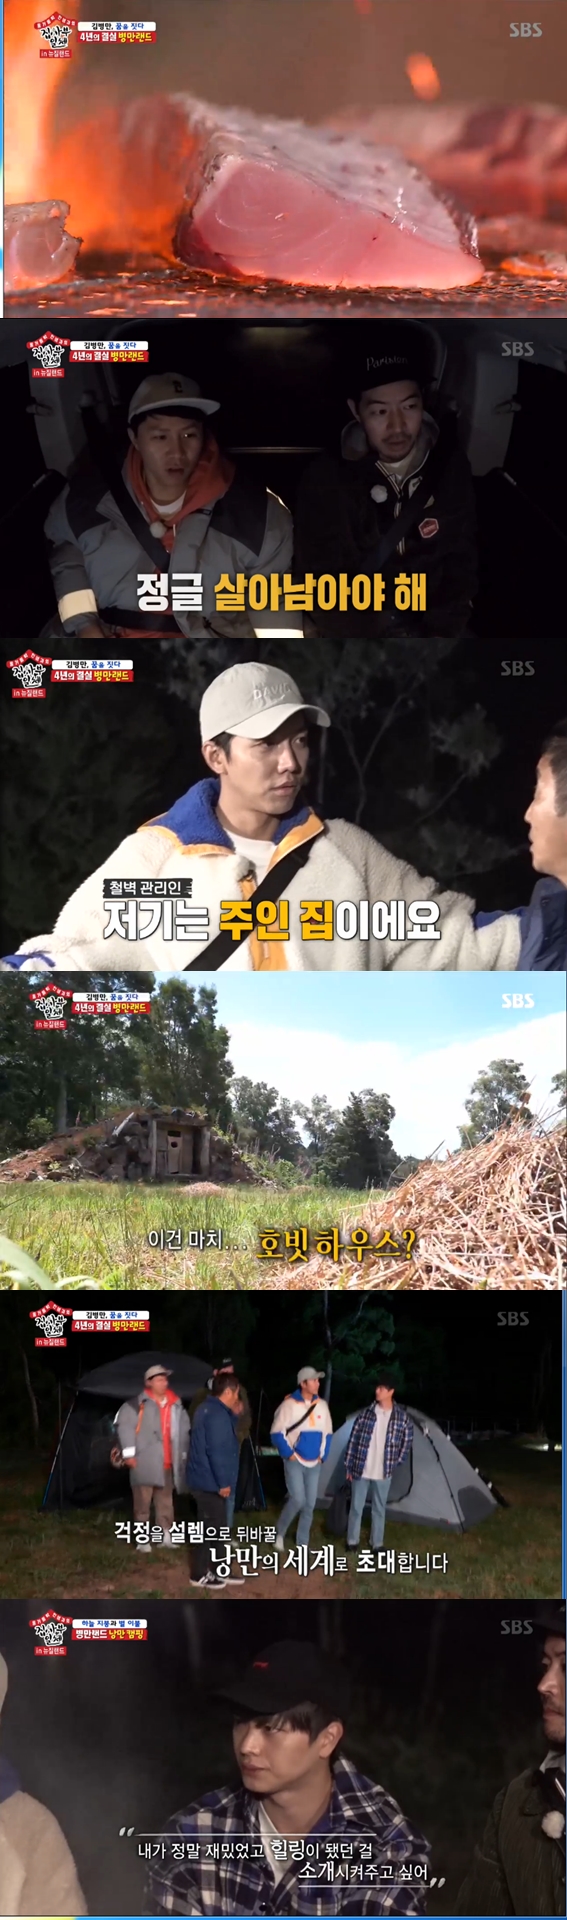 The Bottleman Land was literally a dream space.On the 15th night of SBS entertainment program All The Butlers, Kim Byung-man, who appeared as the second master for the first time on the air, showed an adventure in New Zealand.Kim Byung-man, who had already successfully completed the flight by Lee Seung-gi and Yang Se-hyeong at Motiti, also performed a wonderful flight in front of Lee Sang-yoon and Yook Sungjae.Lee Seung-gi and Yang Se-hyeong were on board this flight together.Lee Sang-yoon admired Kim Byung-man, who landed in a nice flight, saying, I can not believe it.The agent who gives detailed instructions next to Kim Byung-man also praised Kim Byung-man as beautiful when he made perfect landing.Kim Byung-man made a nice landing and then made a gag and did not forget Comedians duty.Kim Byung-man was embarrassed and clapped his hands as the members raved, but his expression did not leave a smile.Kim Byung-man suggested to the members who were admiring Kim Byung-mans wonderful flight to go home.The house he spoke of was a place where Kim Byung-man had made a haven in New Zealand, but the members were anxious as they continued on the way without fire.Lee Sang-yoon predicted the hardship, saying, Is not there a house on a tree?But where I arrived, there was a scene different from the members thoughts. Yang Se-hyeong did not stop admiring the wonderful second floor house, saying, Its too good for me to think.The members were surprised to see the house closely. The house was filled with the nails of Kim Byung-man himself.Kim Byung-man told me that he had made his own house for four years.Kim Byung-man explained why he created a sickland in New Zealand.He said, I wanted to make a resting place because I was the main character in the game. He revealed the process of creating a beautiful Land in the middle of the game.Kim Byung-man confessed that he had made a dream space by visiting here every time he had time for four years and received a look of respect from the members.But there was no place for the members to sleep in the baro-looking house in the bottle-man Land. Lee Seung-gi looked at the wonderful second floor house and asked, Do we sleep here?But Kim Byung-man replied: This is where the owner lives.Lee Seung-gi said, Thats a lot of money. He took out the money he won in the bet before coming to New Zealand.But Kim Byung-man flatly refused to sleep in the second floor house no matter how much he paid.I have a lot of money too, he said, laughing, saying, there is no money here. Then he took the members to the house on the tree.I can sleep here if I can come up, he said after adeptly climbing up to the house.Yang Se-hyeong then struggled up Kim Byung-man to the tree house.Yang Se-hyeong, who climbed up the tree, could not stop admiring the scenery that unfolded there.However, Yang Se-hyeong suggested to the members that here is only the master.The third house Kim Byung-man took the members with him was a dream, and from a distance, the members admired the house of dreams where the Hobbits lived.Kim Byung-man also said, This is the place I cared most about.However, Kim Byung-man said, There is a disadvantage, and There is no toilet door.Eventually, the accommodation that the members found to sleep was a tent in the middle of the middle.Lee Seung-gi looked at the tent and laughed, saying, In the end, should I go to bed outdoors for a long time?However, the frustration was also a little bit like a child, saying, I will be romantic, and I can sleep by watching the stars in the night sky.Kim Byung-man showed the end of romance to the members who enjoyed romance. Barbecue should not be missed in this place. He brought out charcoal fire and sausage.The members cheered, and Kim Byung-man baked delicious sausages to meet the expectations of the members.He then mentioned the Lay fish as a must to eat in New Zealand, which raised the taste of the members.Kim Byung-man raised the expectation of the members, saying, We can catch it here.I really like fishing, said Yook Sungjae, and Kim Byung-man said, You can do everything you want to do here.Kim Byung-man told the members that he would do it the next day, turning off the lights and watching the starry night sky.The following day the members experienced all the things Kim Byung-man promised the day before.The members who woke up in the romantic tent climbed into the fishing boat and actually caught the Lay fish to signal the start of the romantic camp.